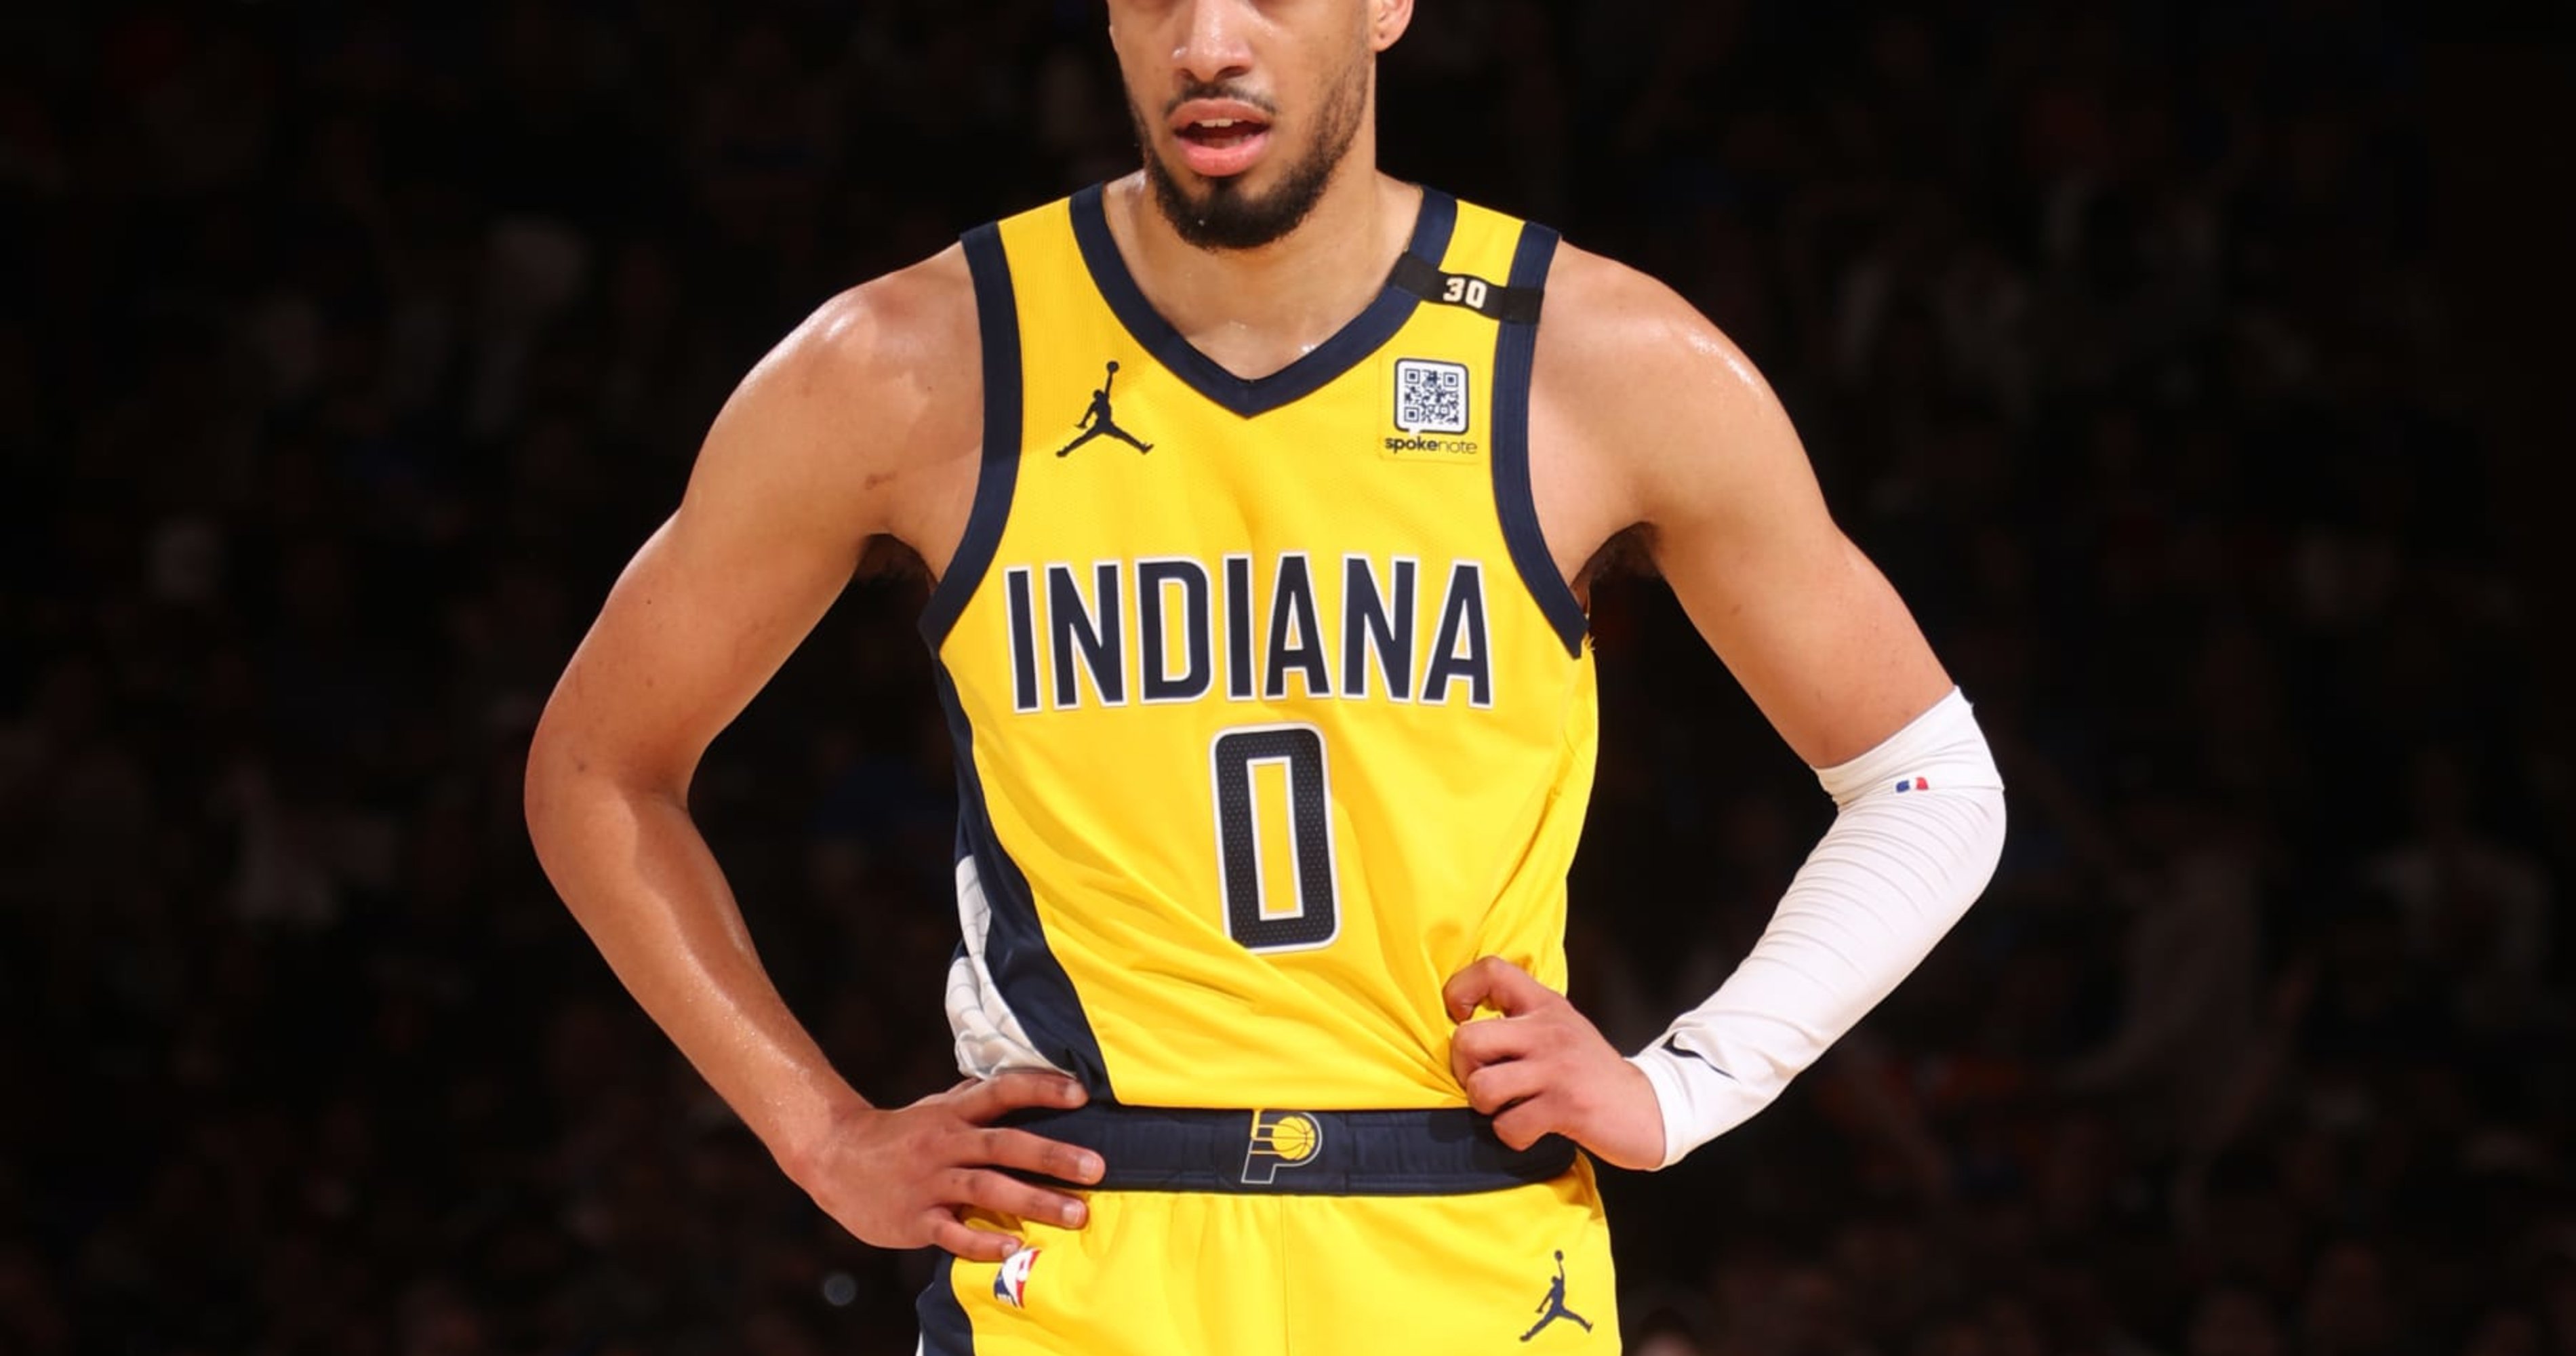 NBA Rumors: Pacers 'On the Prowl' for Roster Upgrades Around Tyrese Haliburton